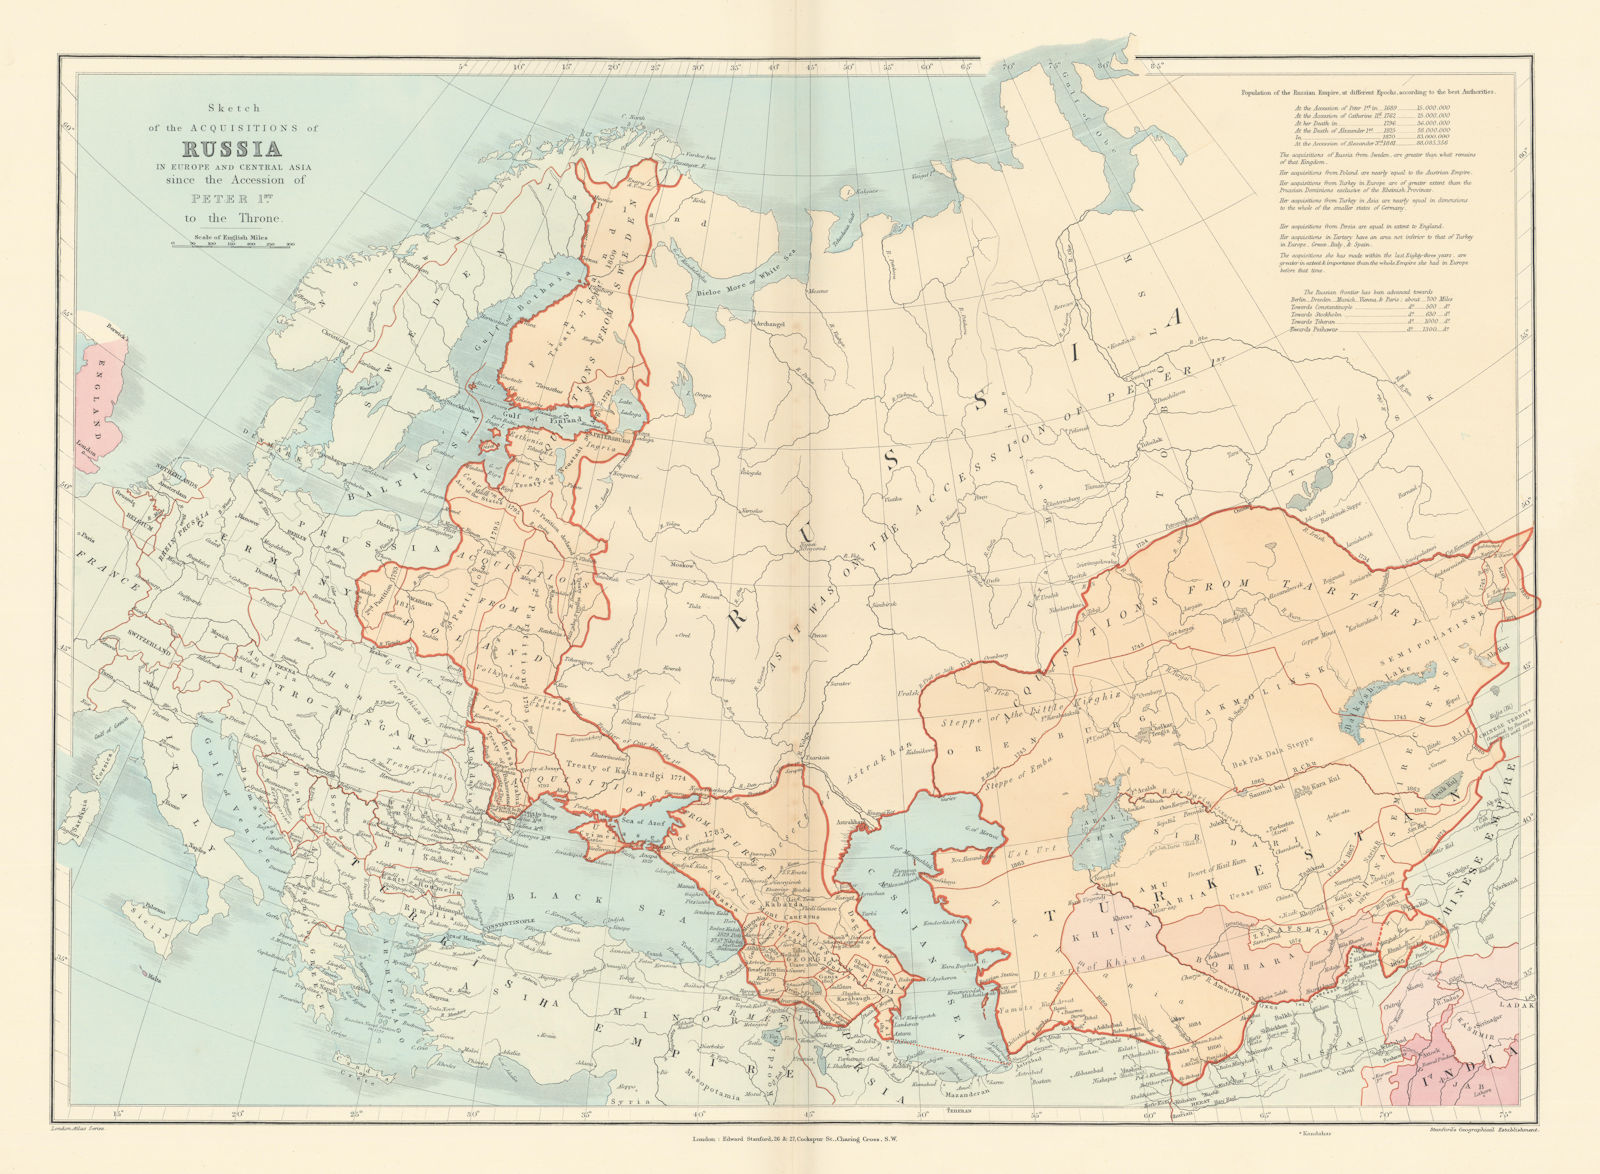 Russian acquisitions in Europe & Central Asia since 1689. STANFORD 1896 map